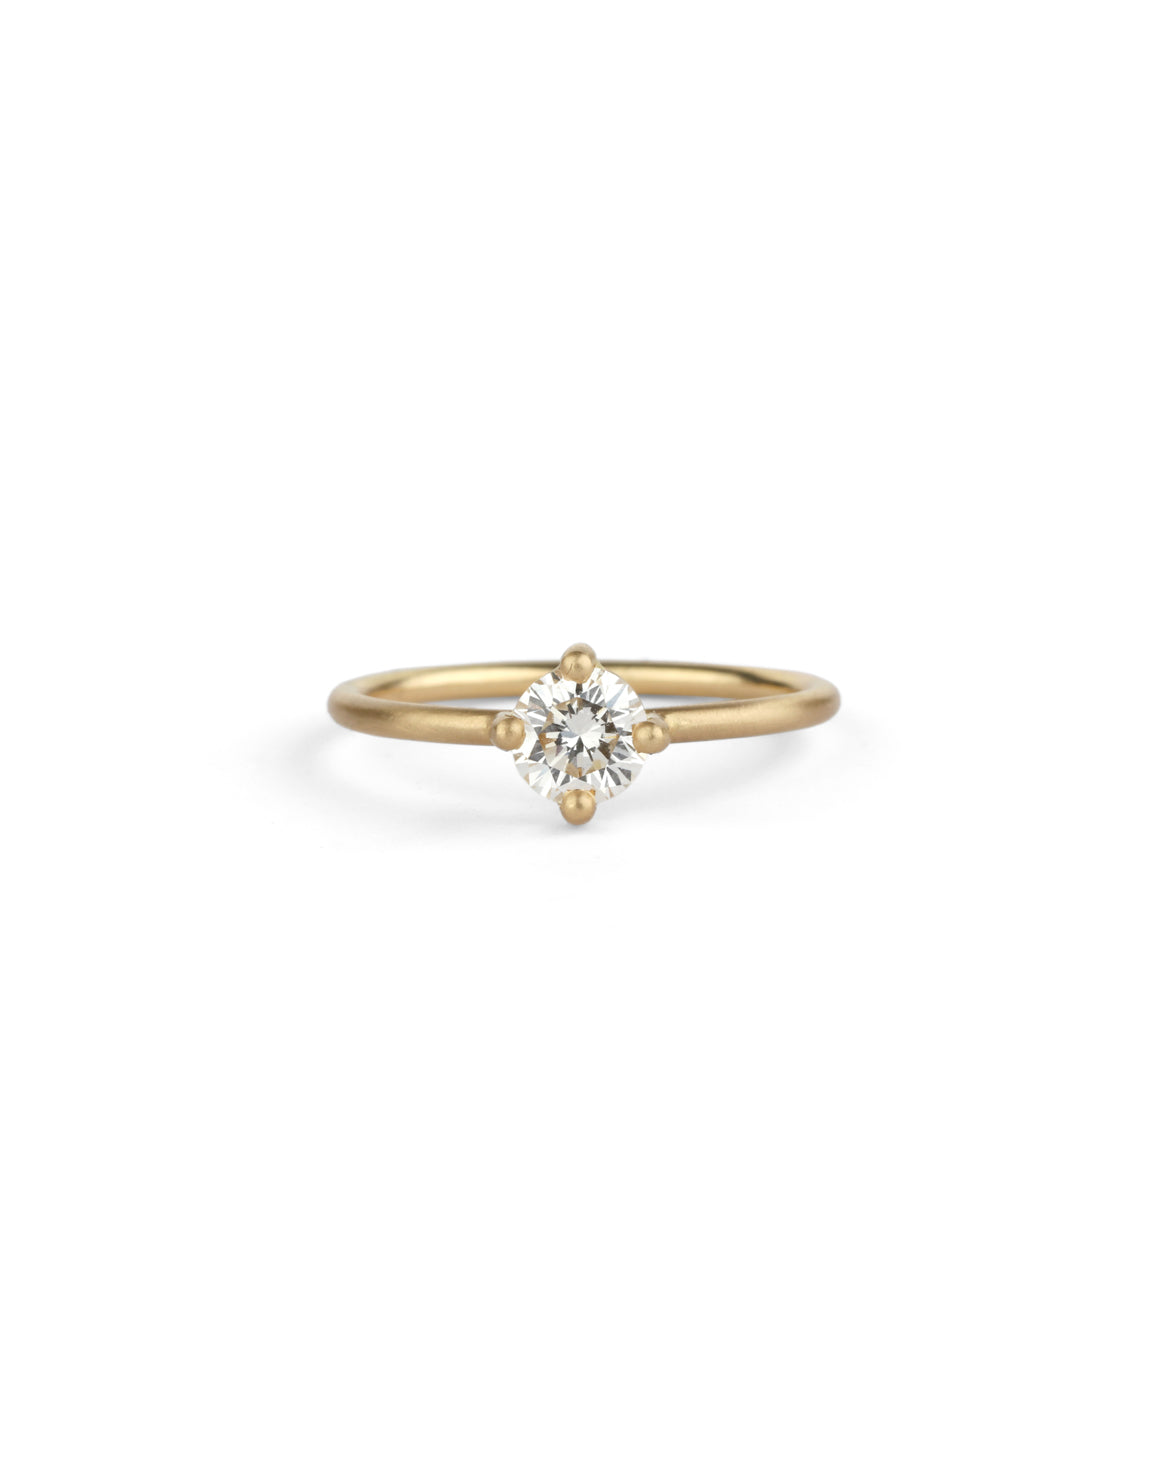 Minimalist Engagement Ring, Simple Engagement Ring, Delicate